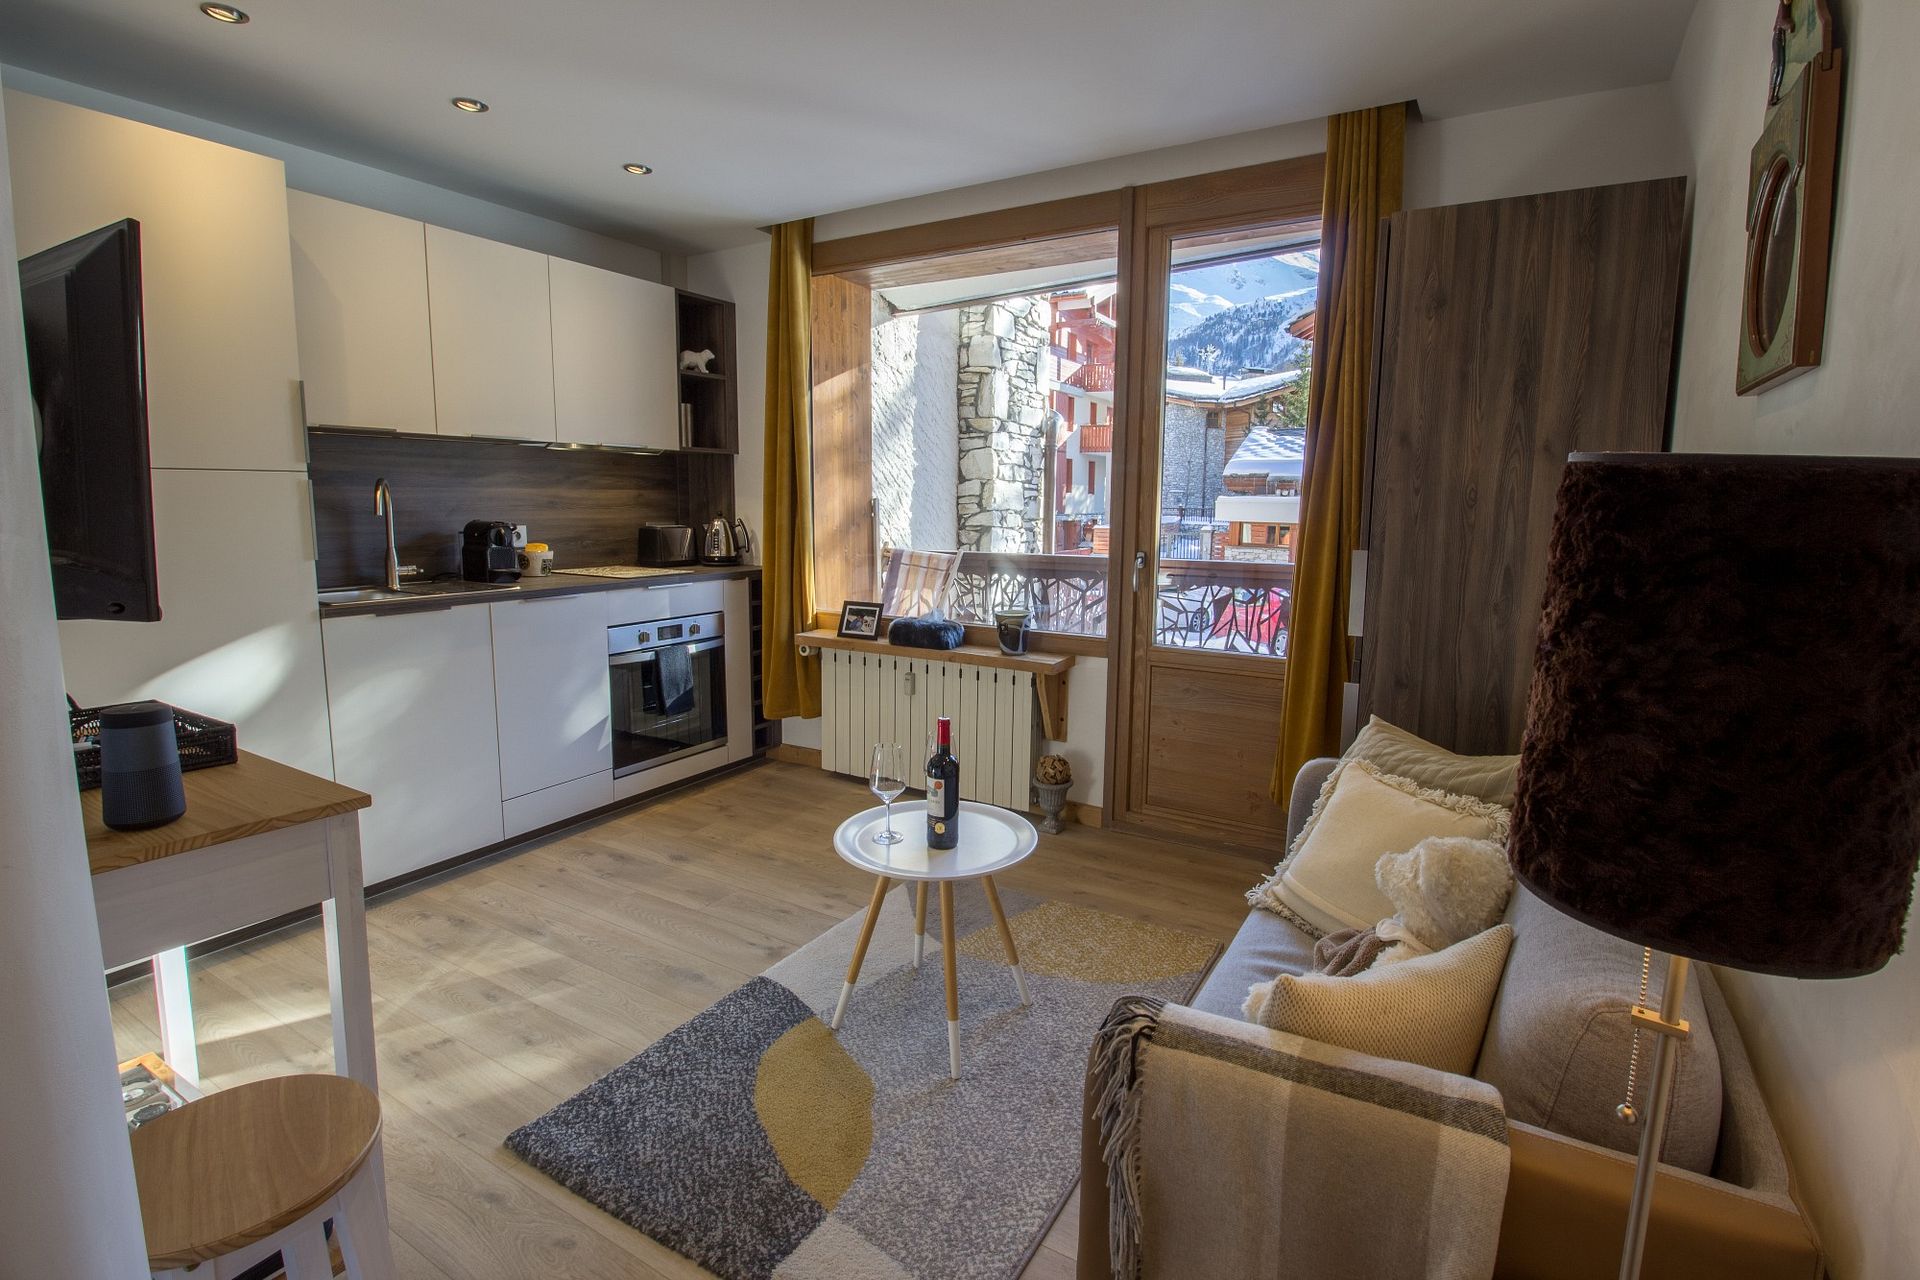 0 bed Apartment For Sale in Espace Killy, French Alps